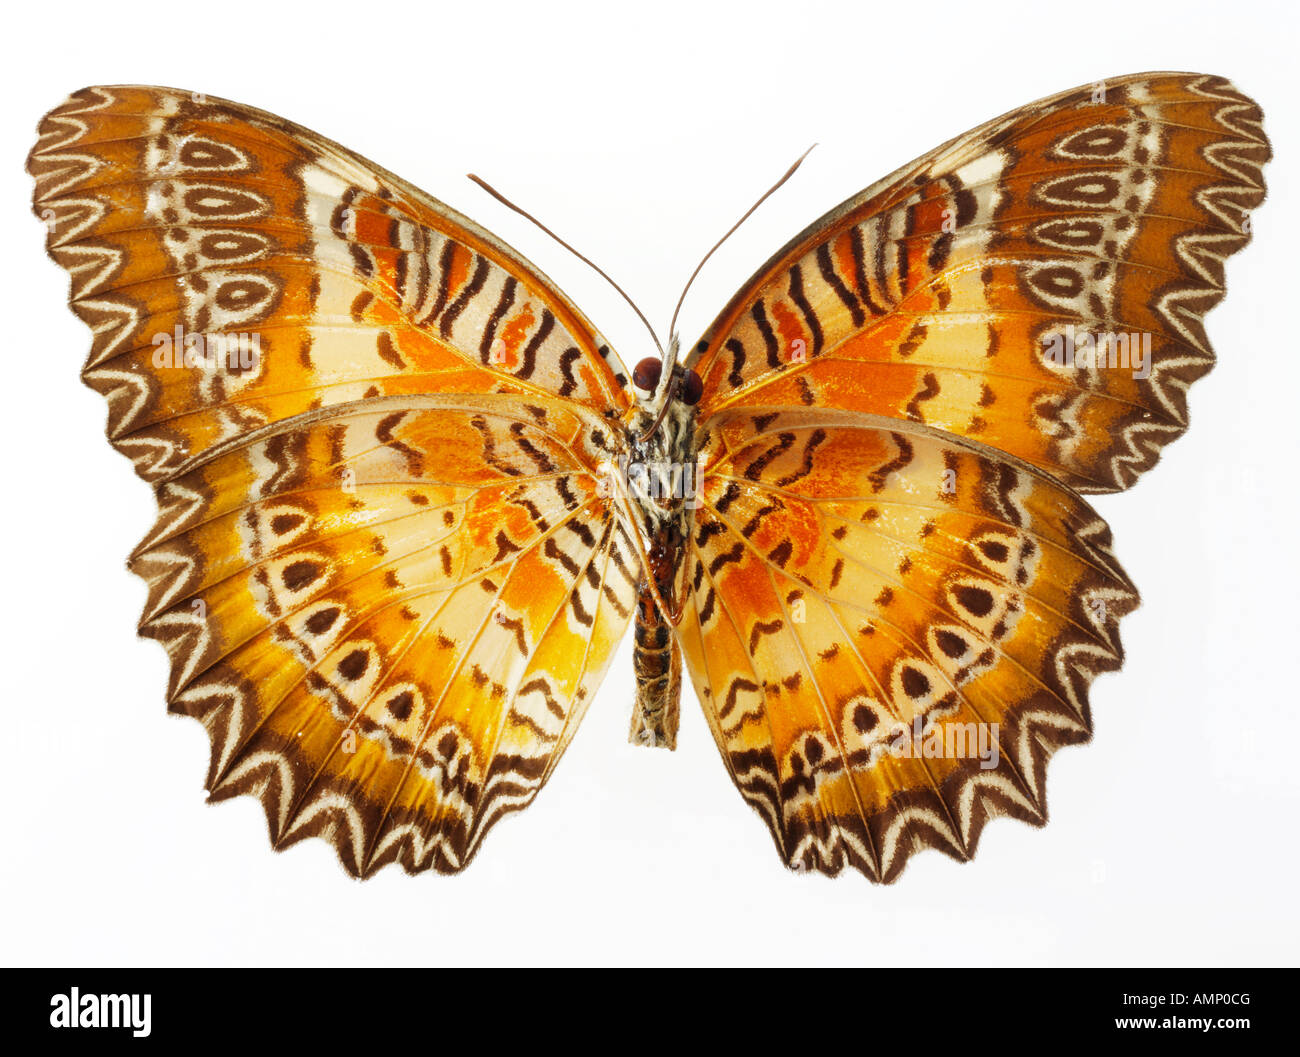 top shot plan view of a Halliconiini fritillary butterfly, opened winged, against a white background in a studio Stock Photo